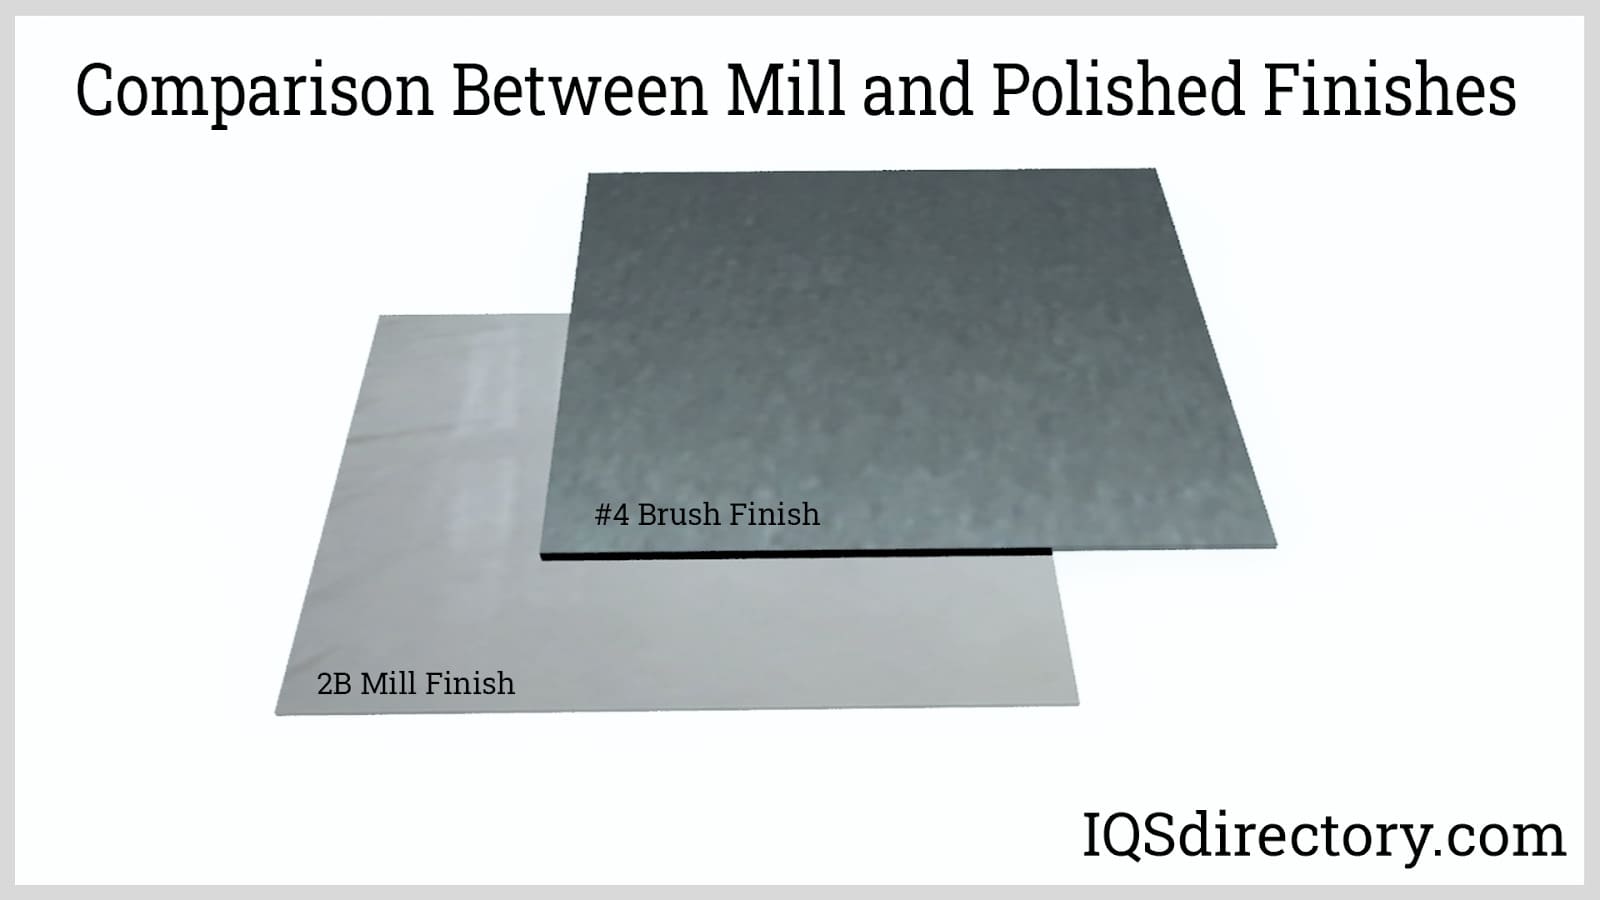 Comparison Between Mill and Polished Finishes